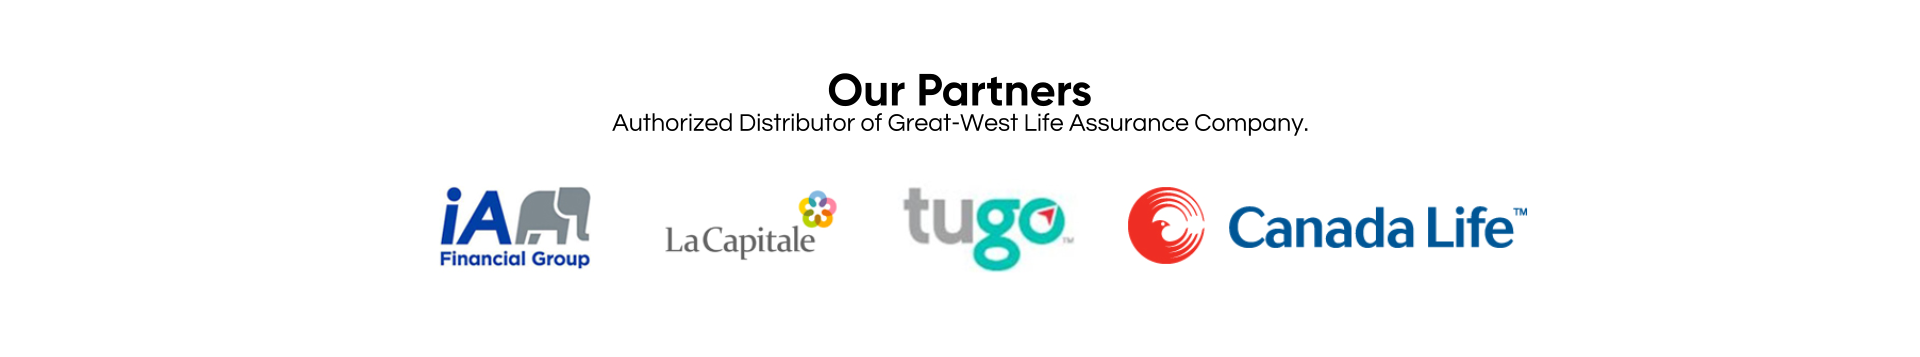 Our Partners Authorized Distributor of Great-West Life Assurance Company.